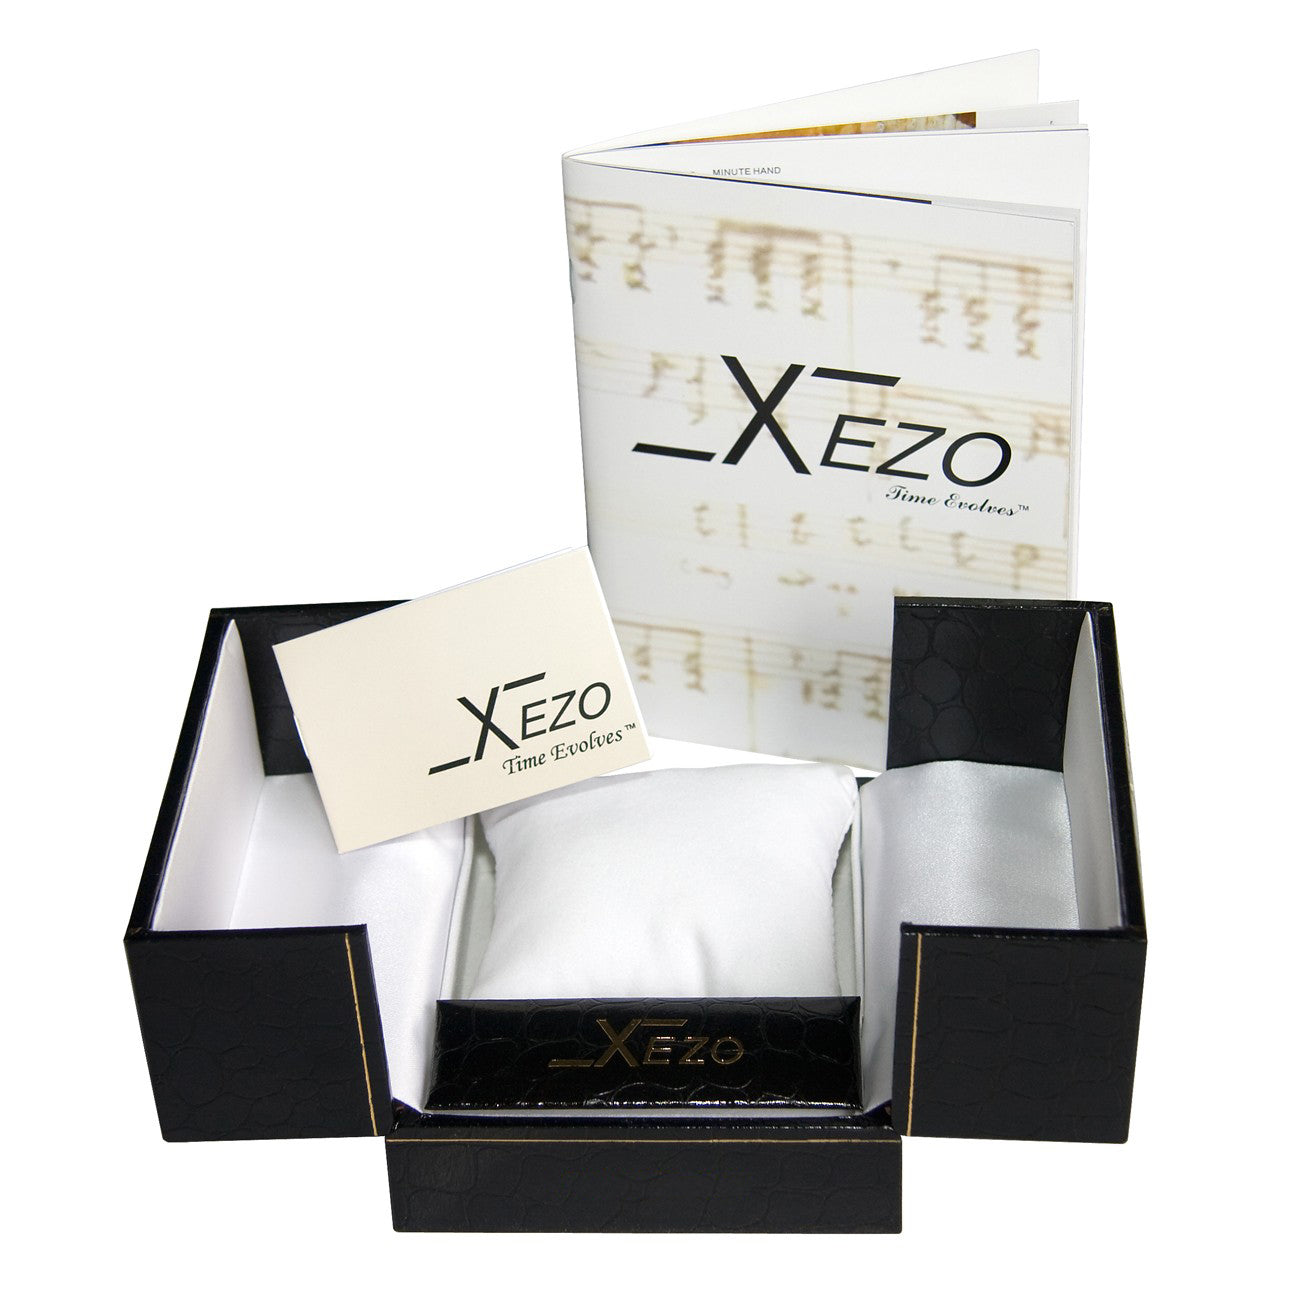 Xezo - Black gift box, certificate, and manual of the Air Commando D45-B watch